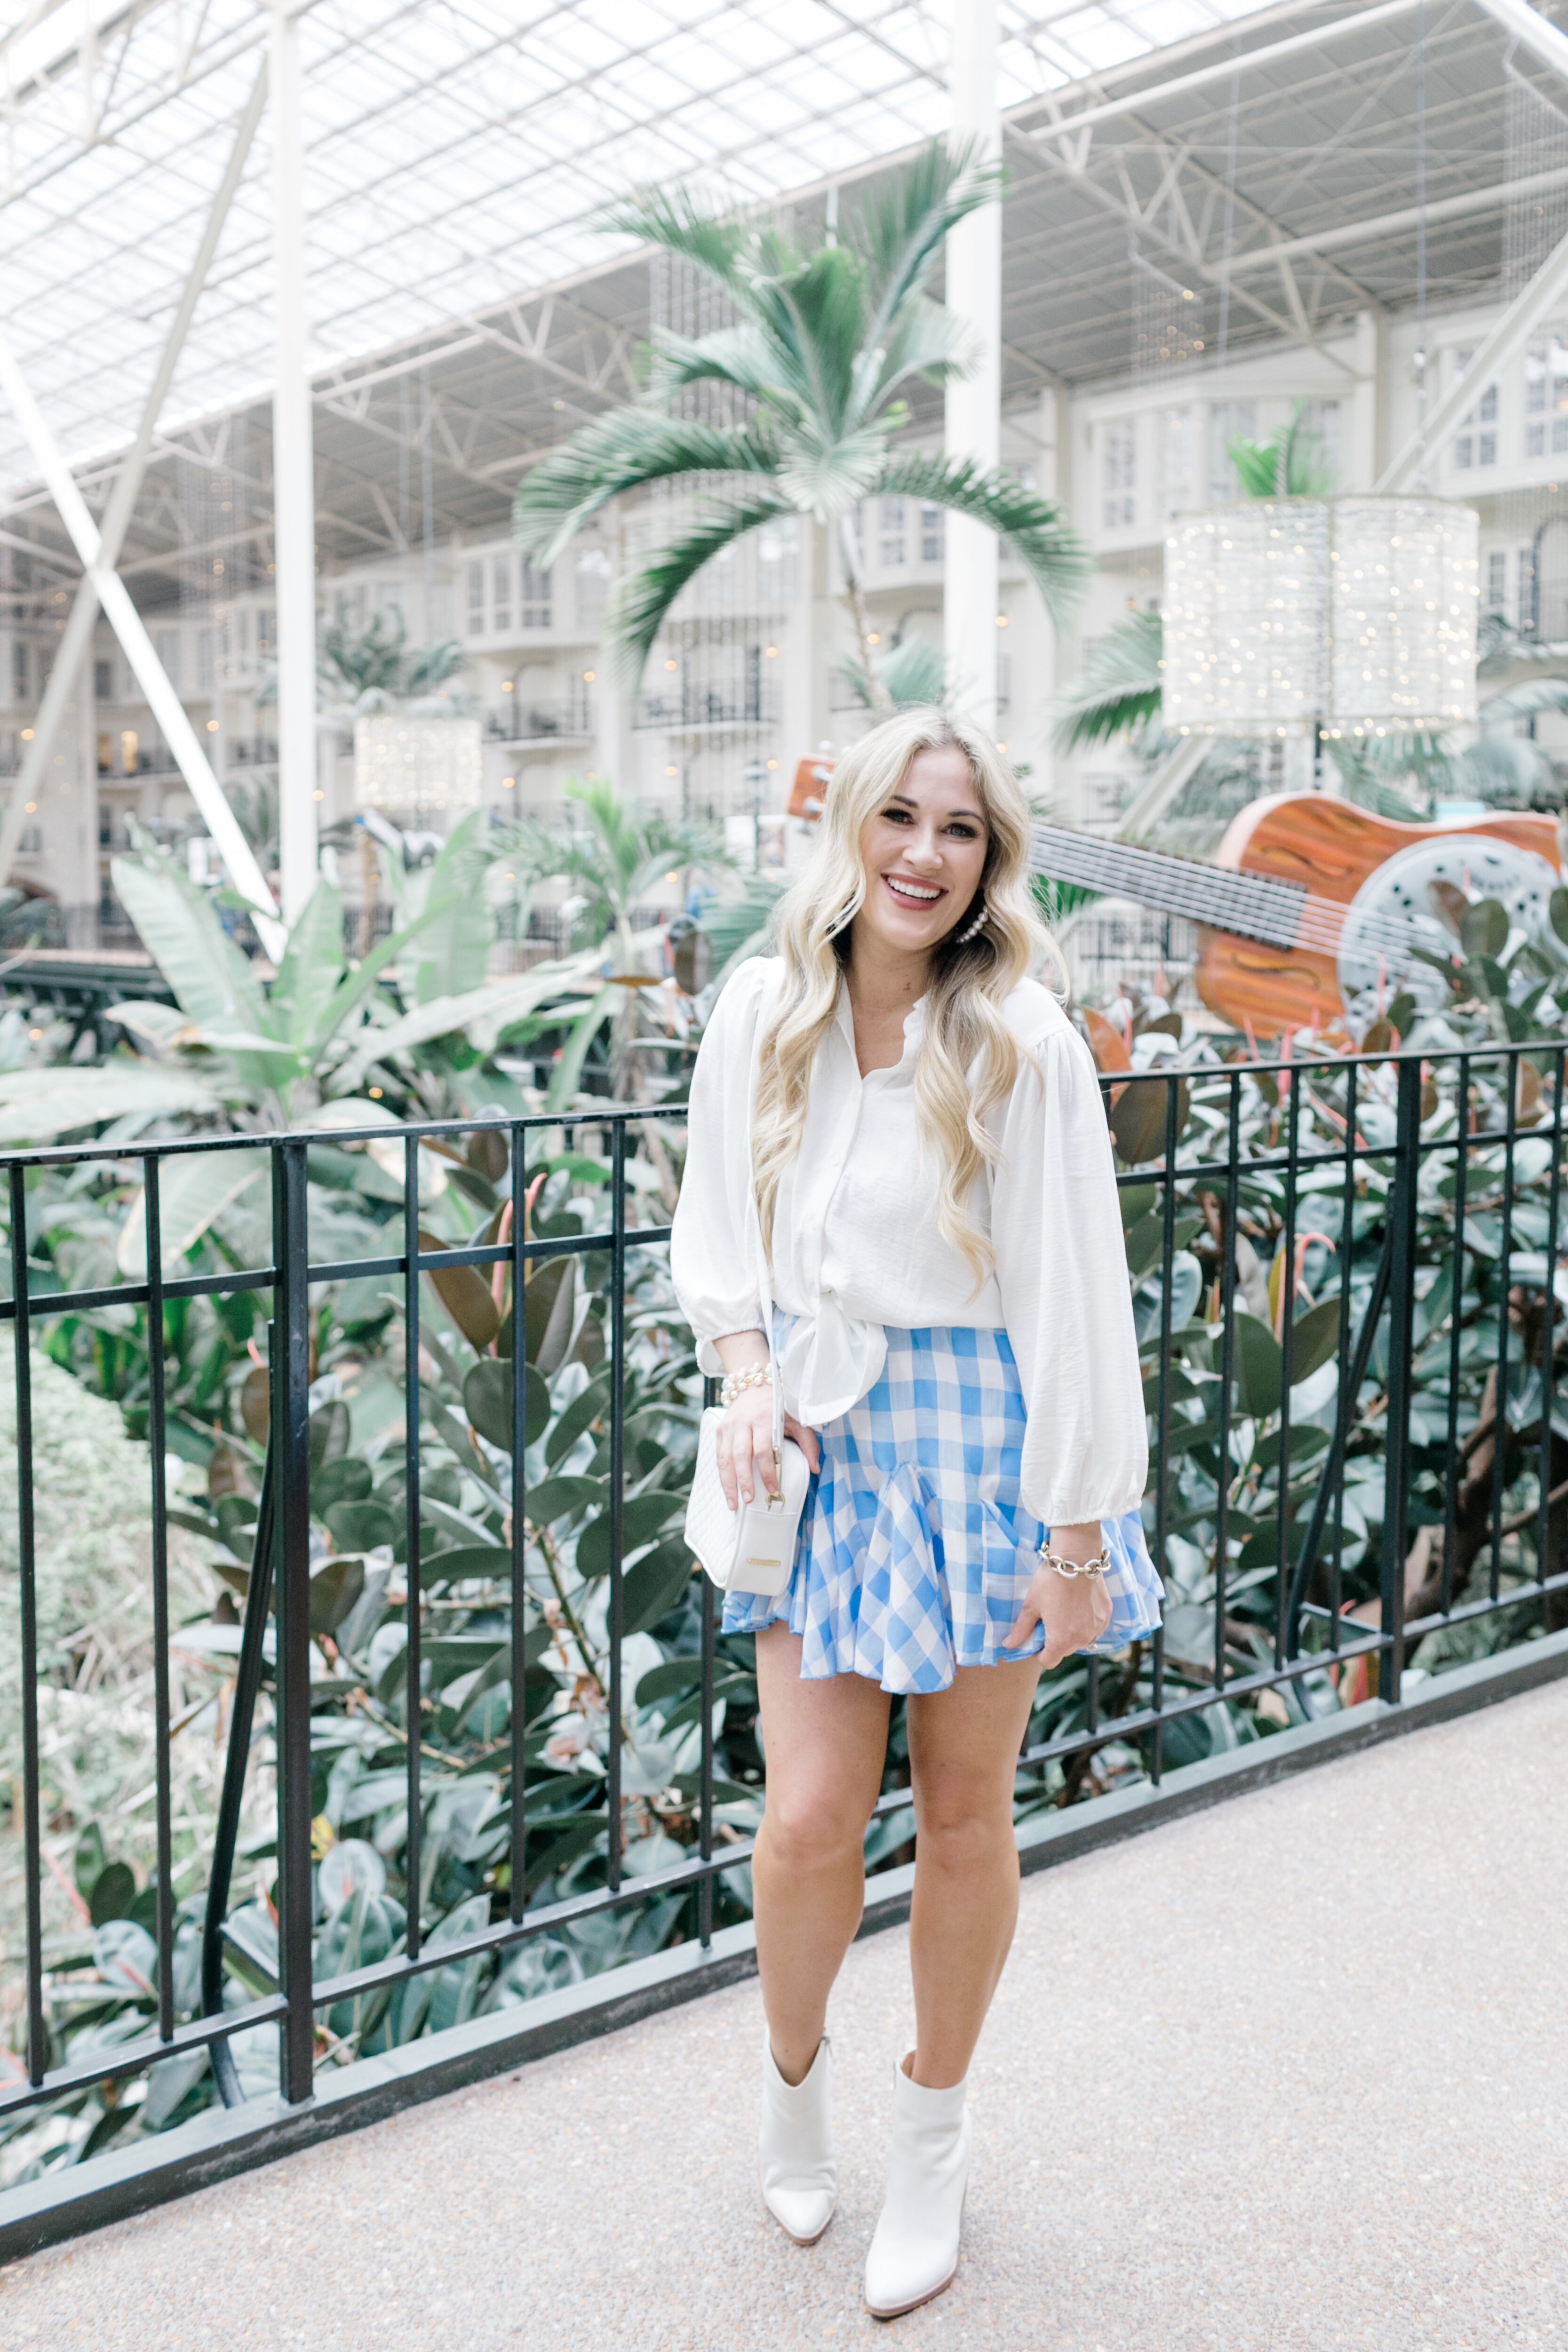 How to Wear a Spring Skirt or Skort, tips featured by top mom fashion blogger, Walking in Memphis in High Heels.